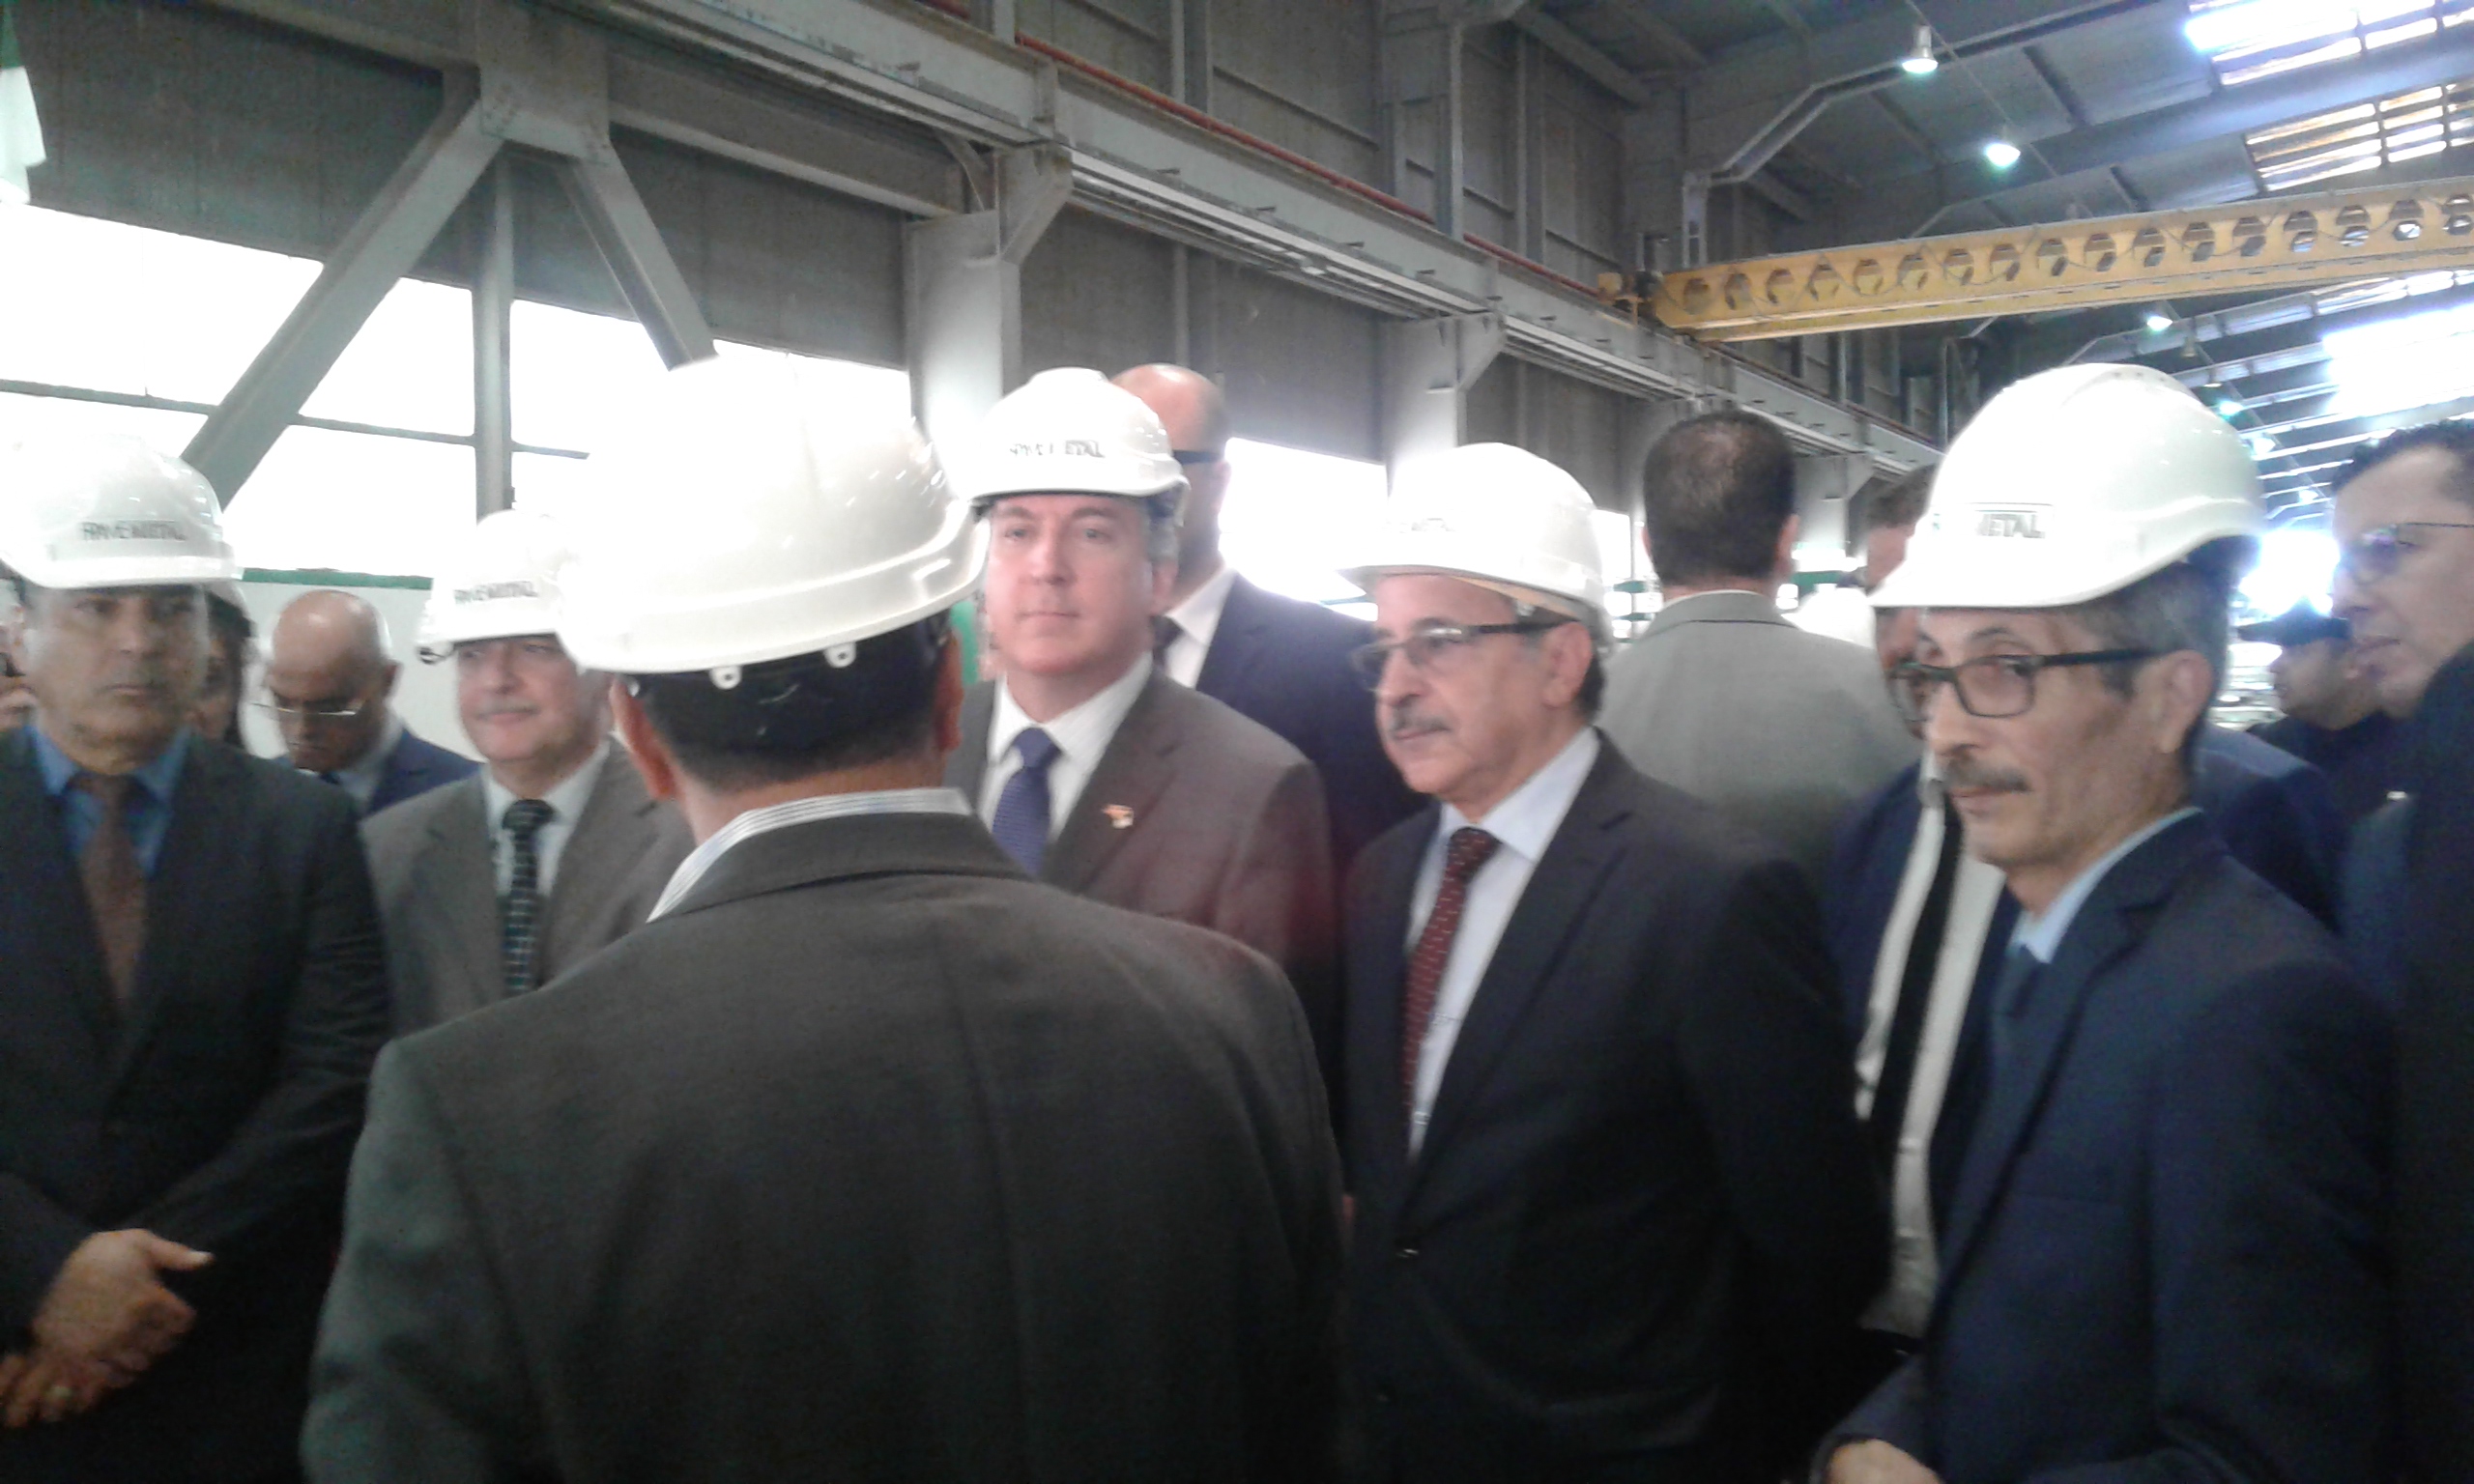 Inauguration of the Frame Metal factory